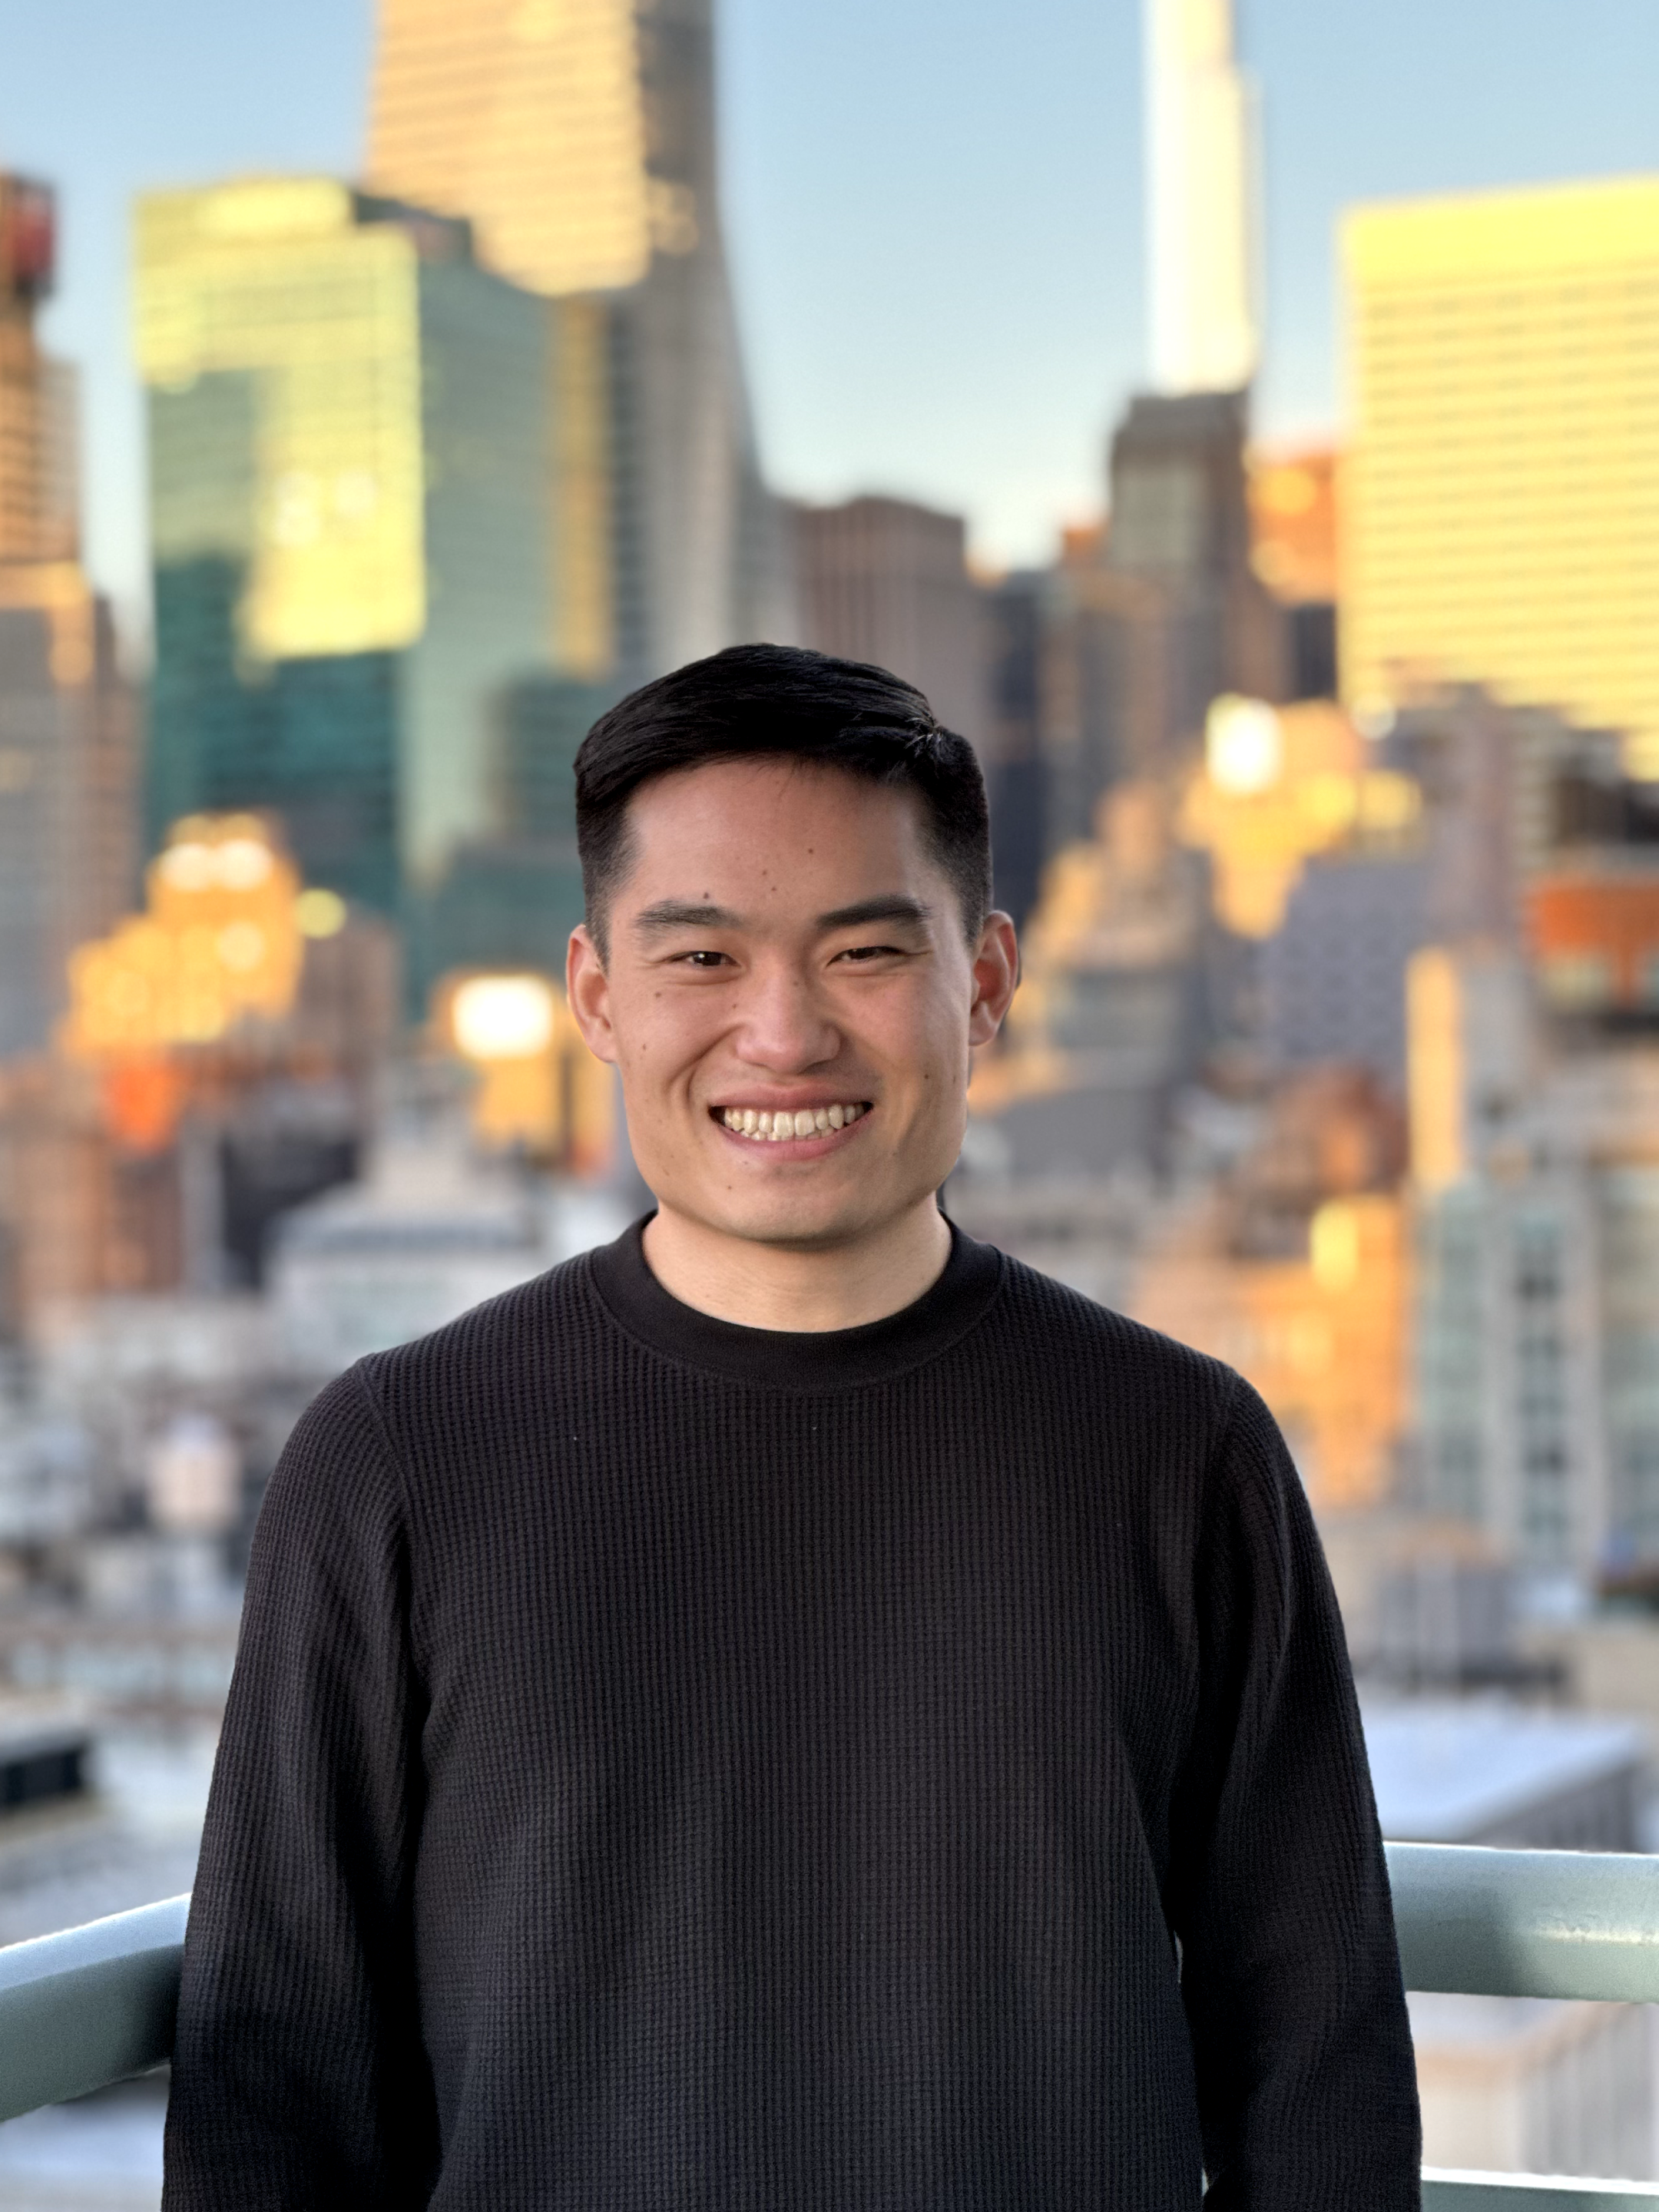 Greg was born and raised in New Jersey, and studied Economics and Sociology at Villanova University. He currently lives in NYC and works in finance. In his free time, he enjoys traveling, staying active, and spending time with his dog.